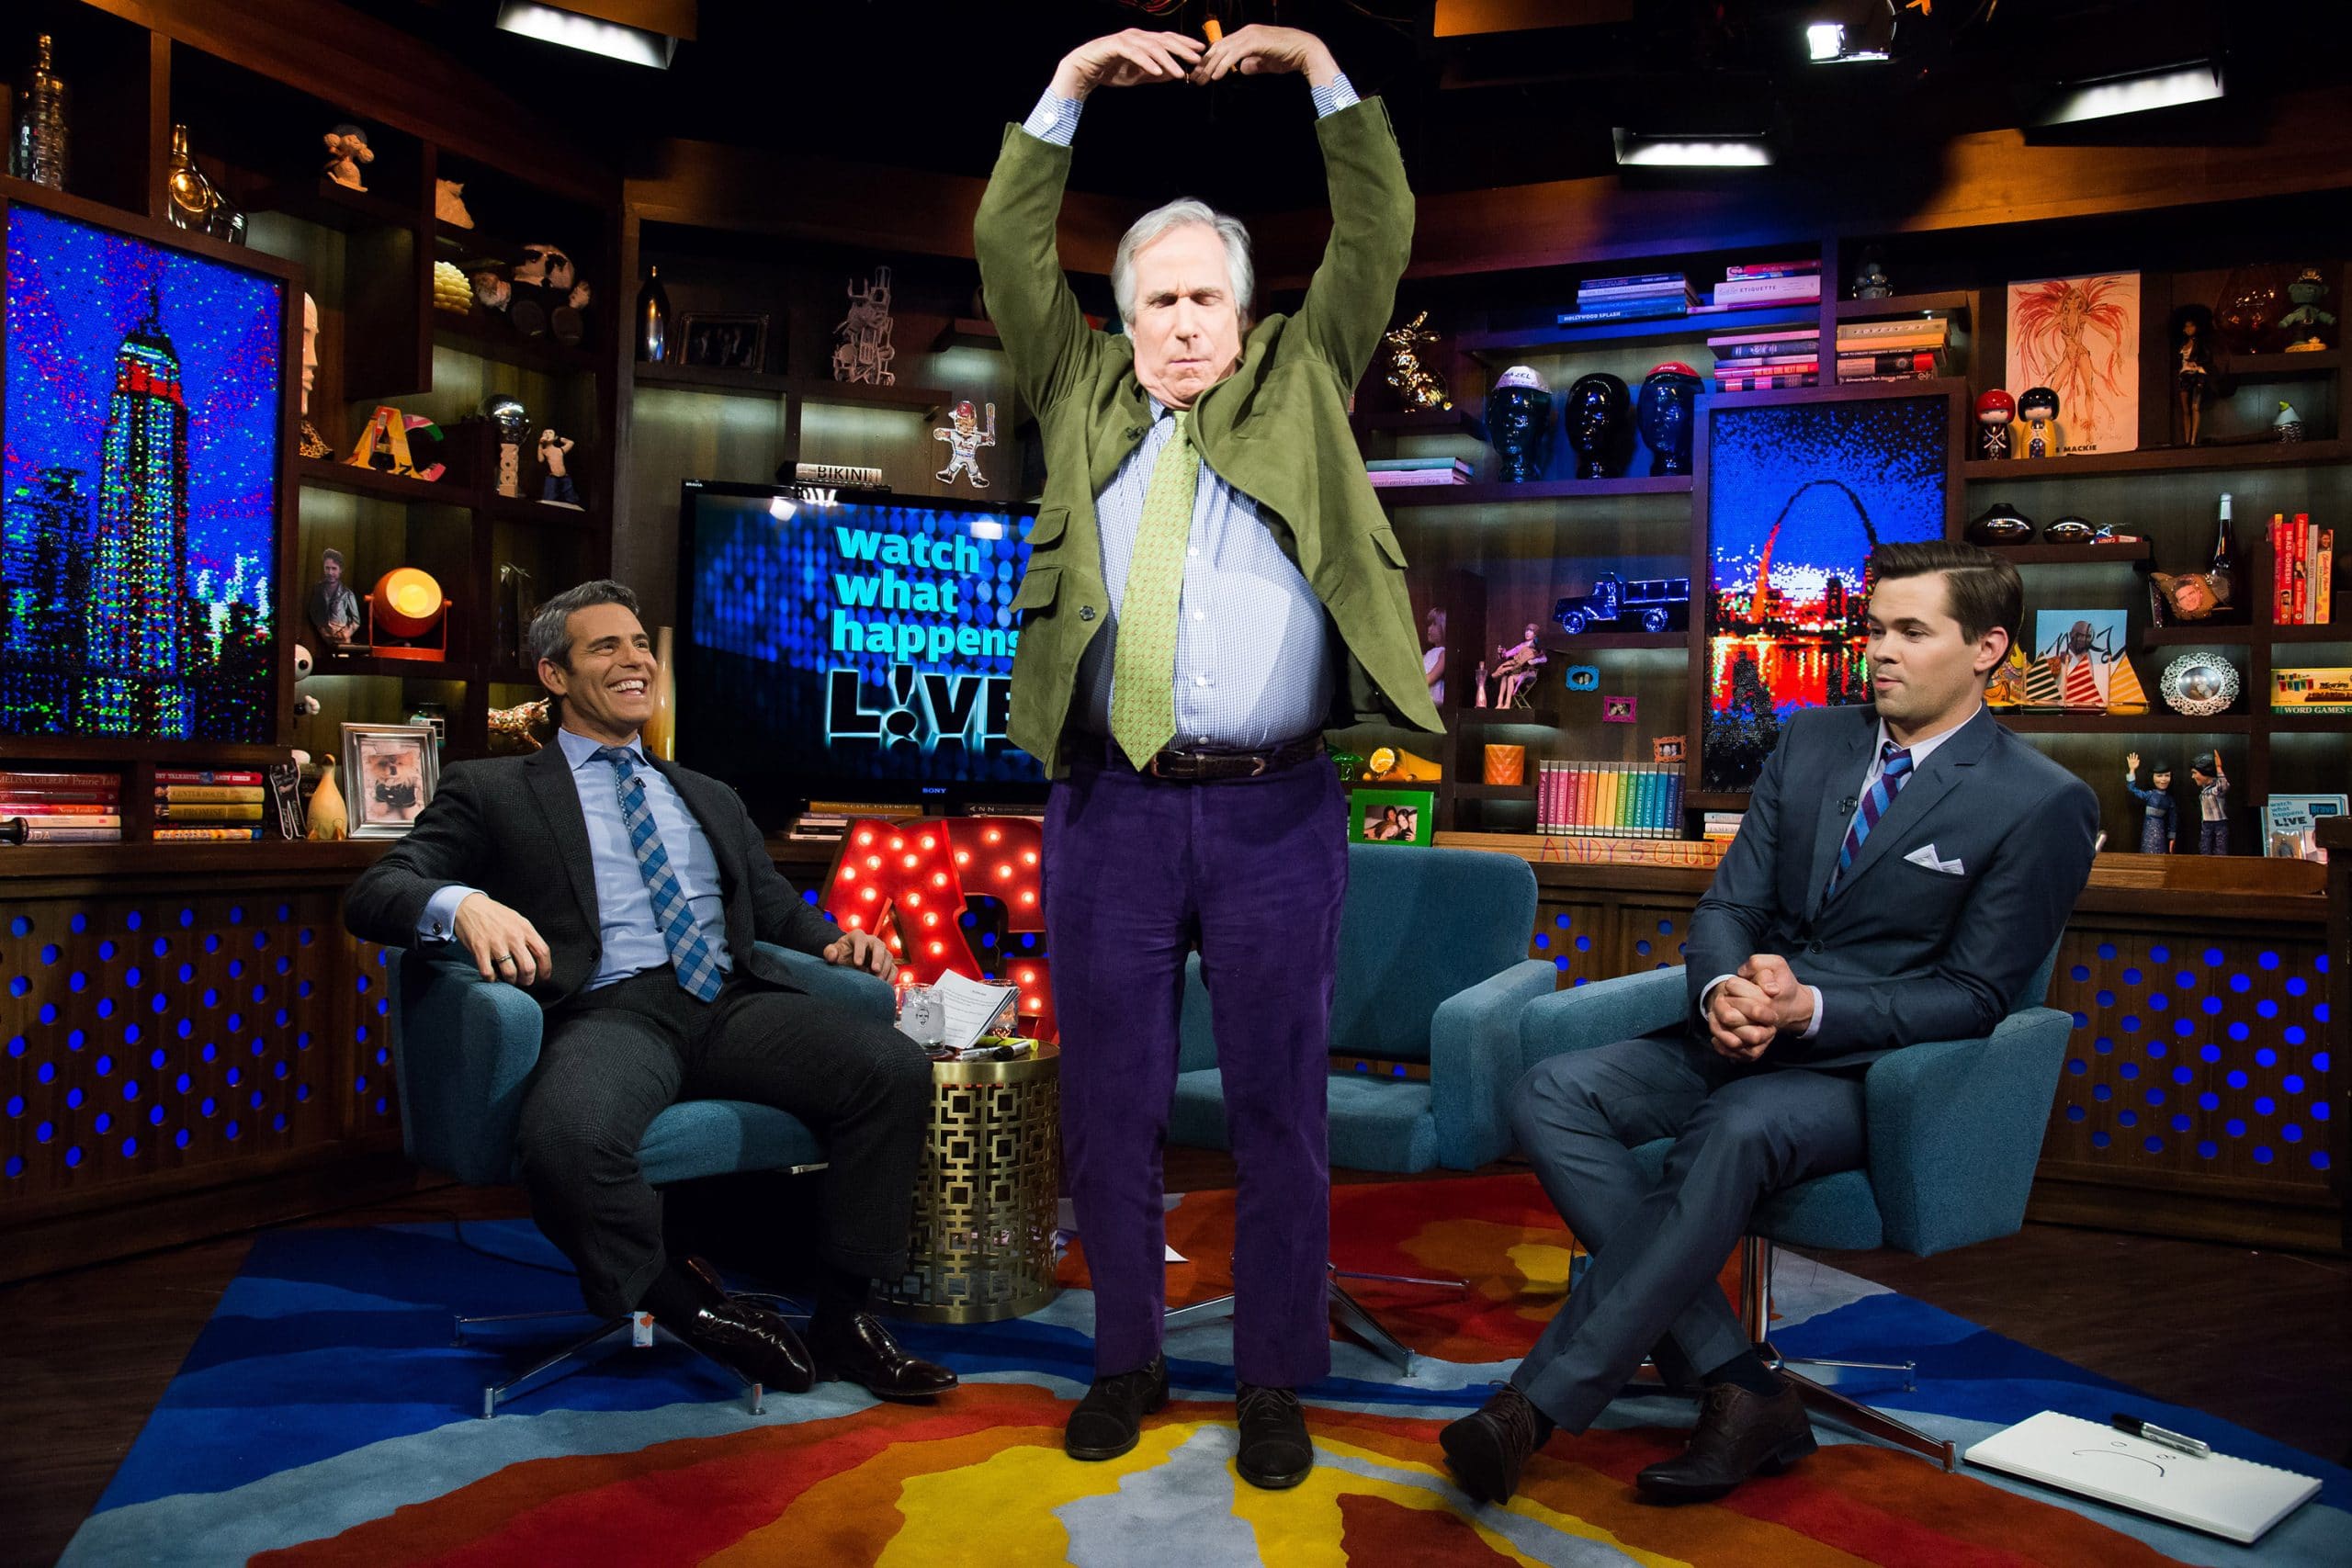 WATCH WHAT HAPPENS LIVE, (from left): host Andy Cohen, Henry Winkler, Andrew Rannell